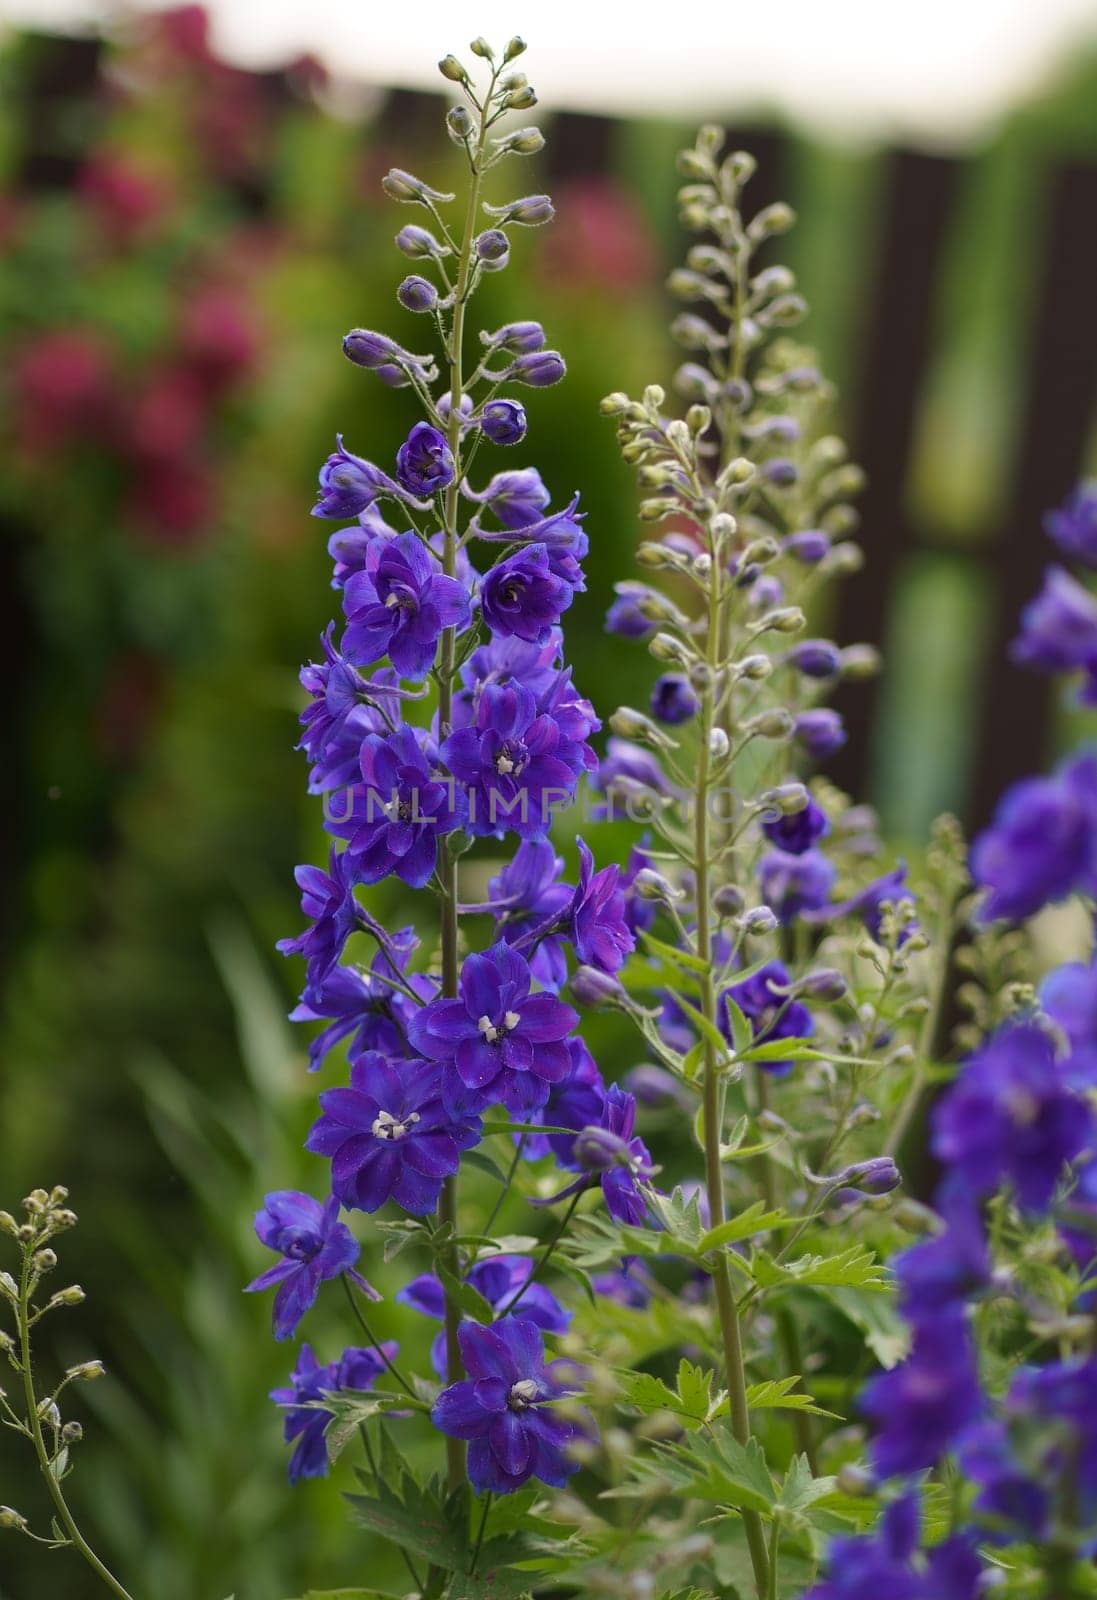 blooming delphinium. Blue flower is the delphinium in the garden on a natural background